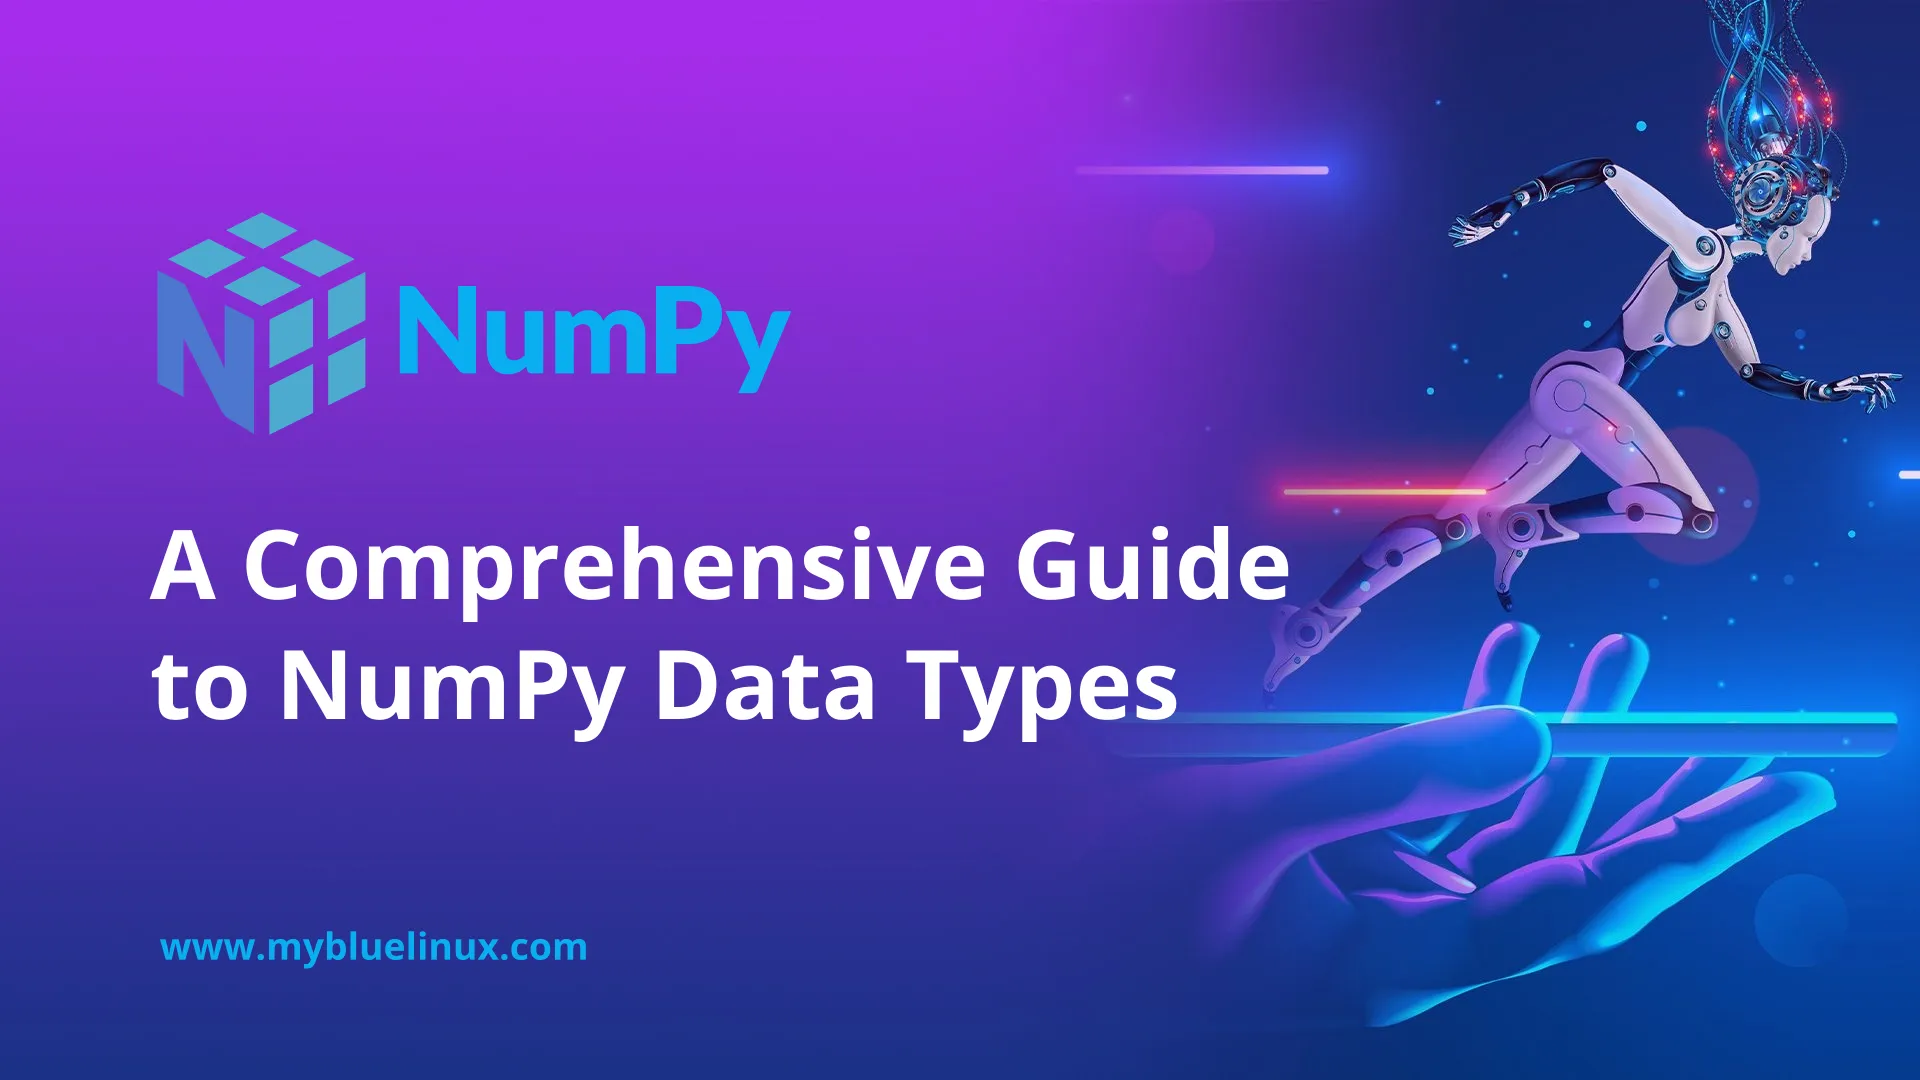 A Comprehensive Guide to NumPy Data Types